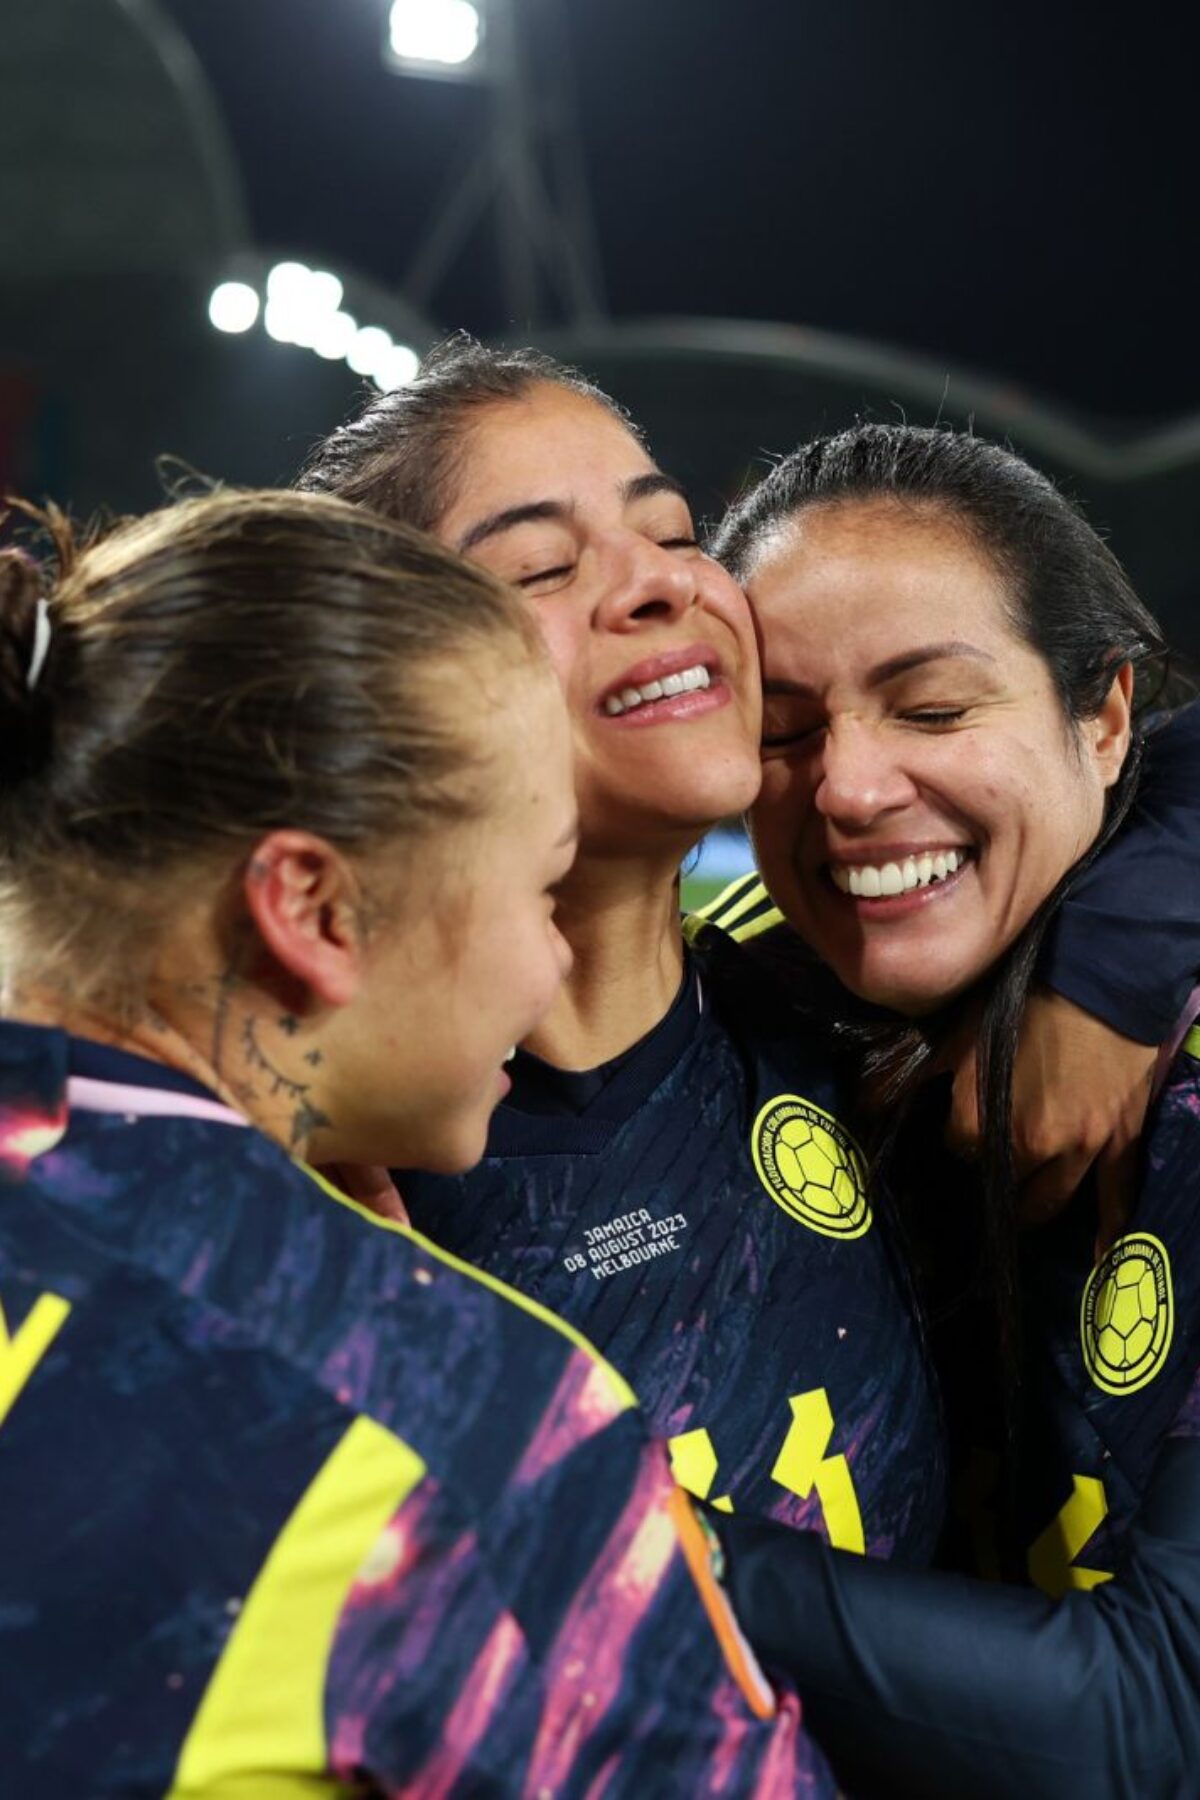 MELBOURNE, AUSTRALIA - AUGUST 08: (L-R) Ana Guzman, Catalina Usme and Diana Ospina Garcia of Colombia celebrate after the team's 1-0 victory and advance to the quarter final following the FIFA Women's World Cup Australia & New Zealand 2023 Round of 16 match between Colombia and Jamaica at Melbourne Rectangular Stadium on August 08, 2023 in Melbourne / Naarm, Australia. (Photo by Alex Pantling - FIFA/FIFA via Getty Images)